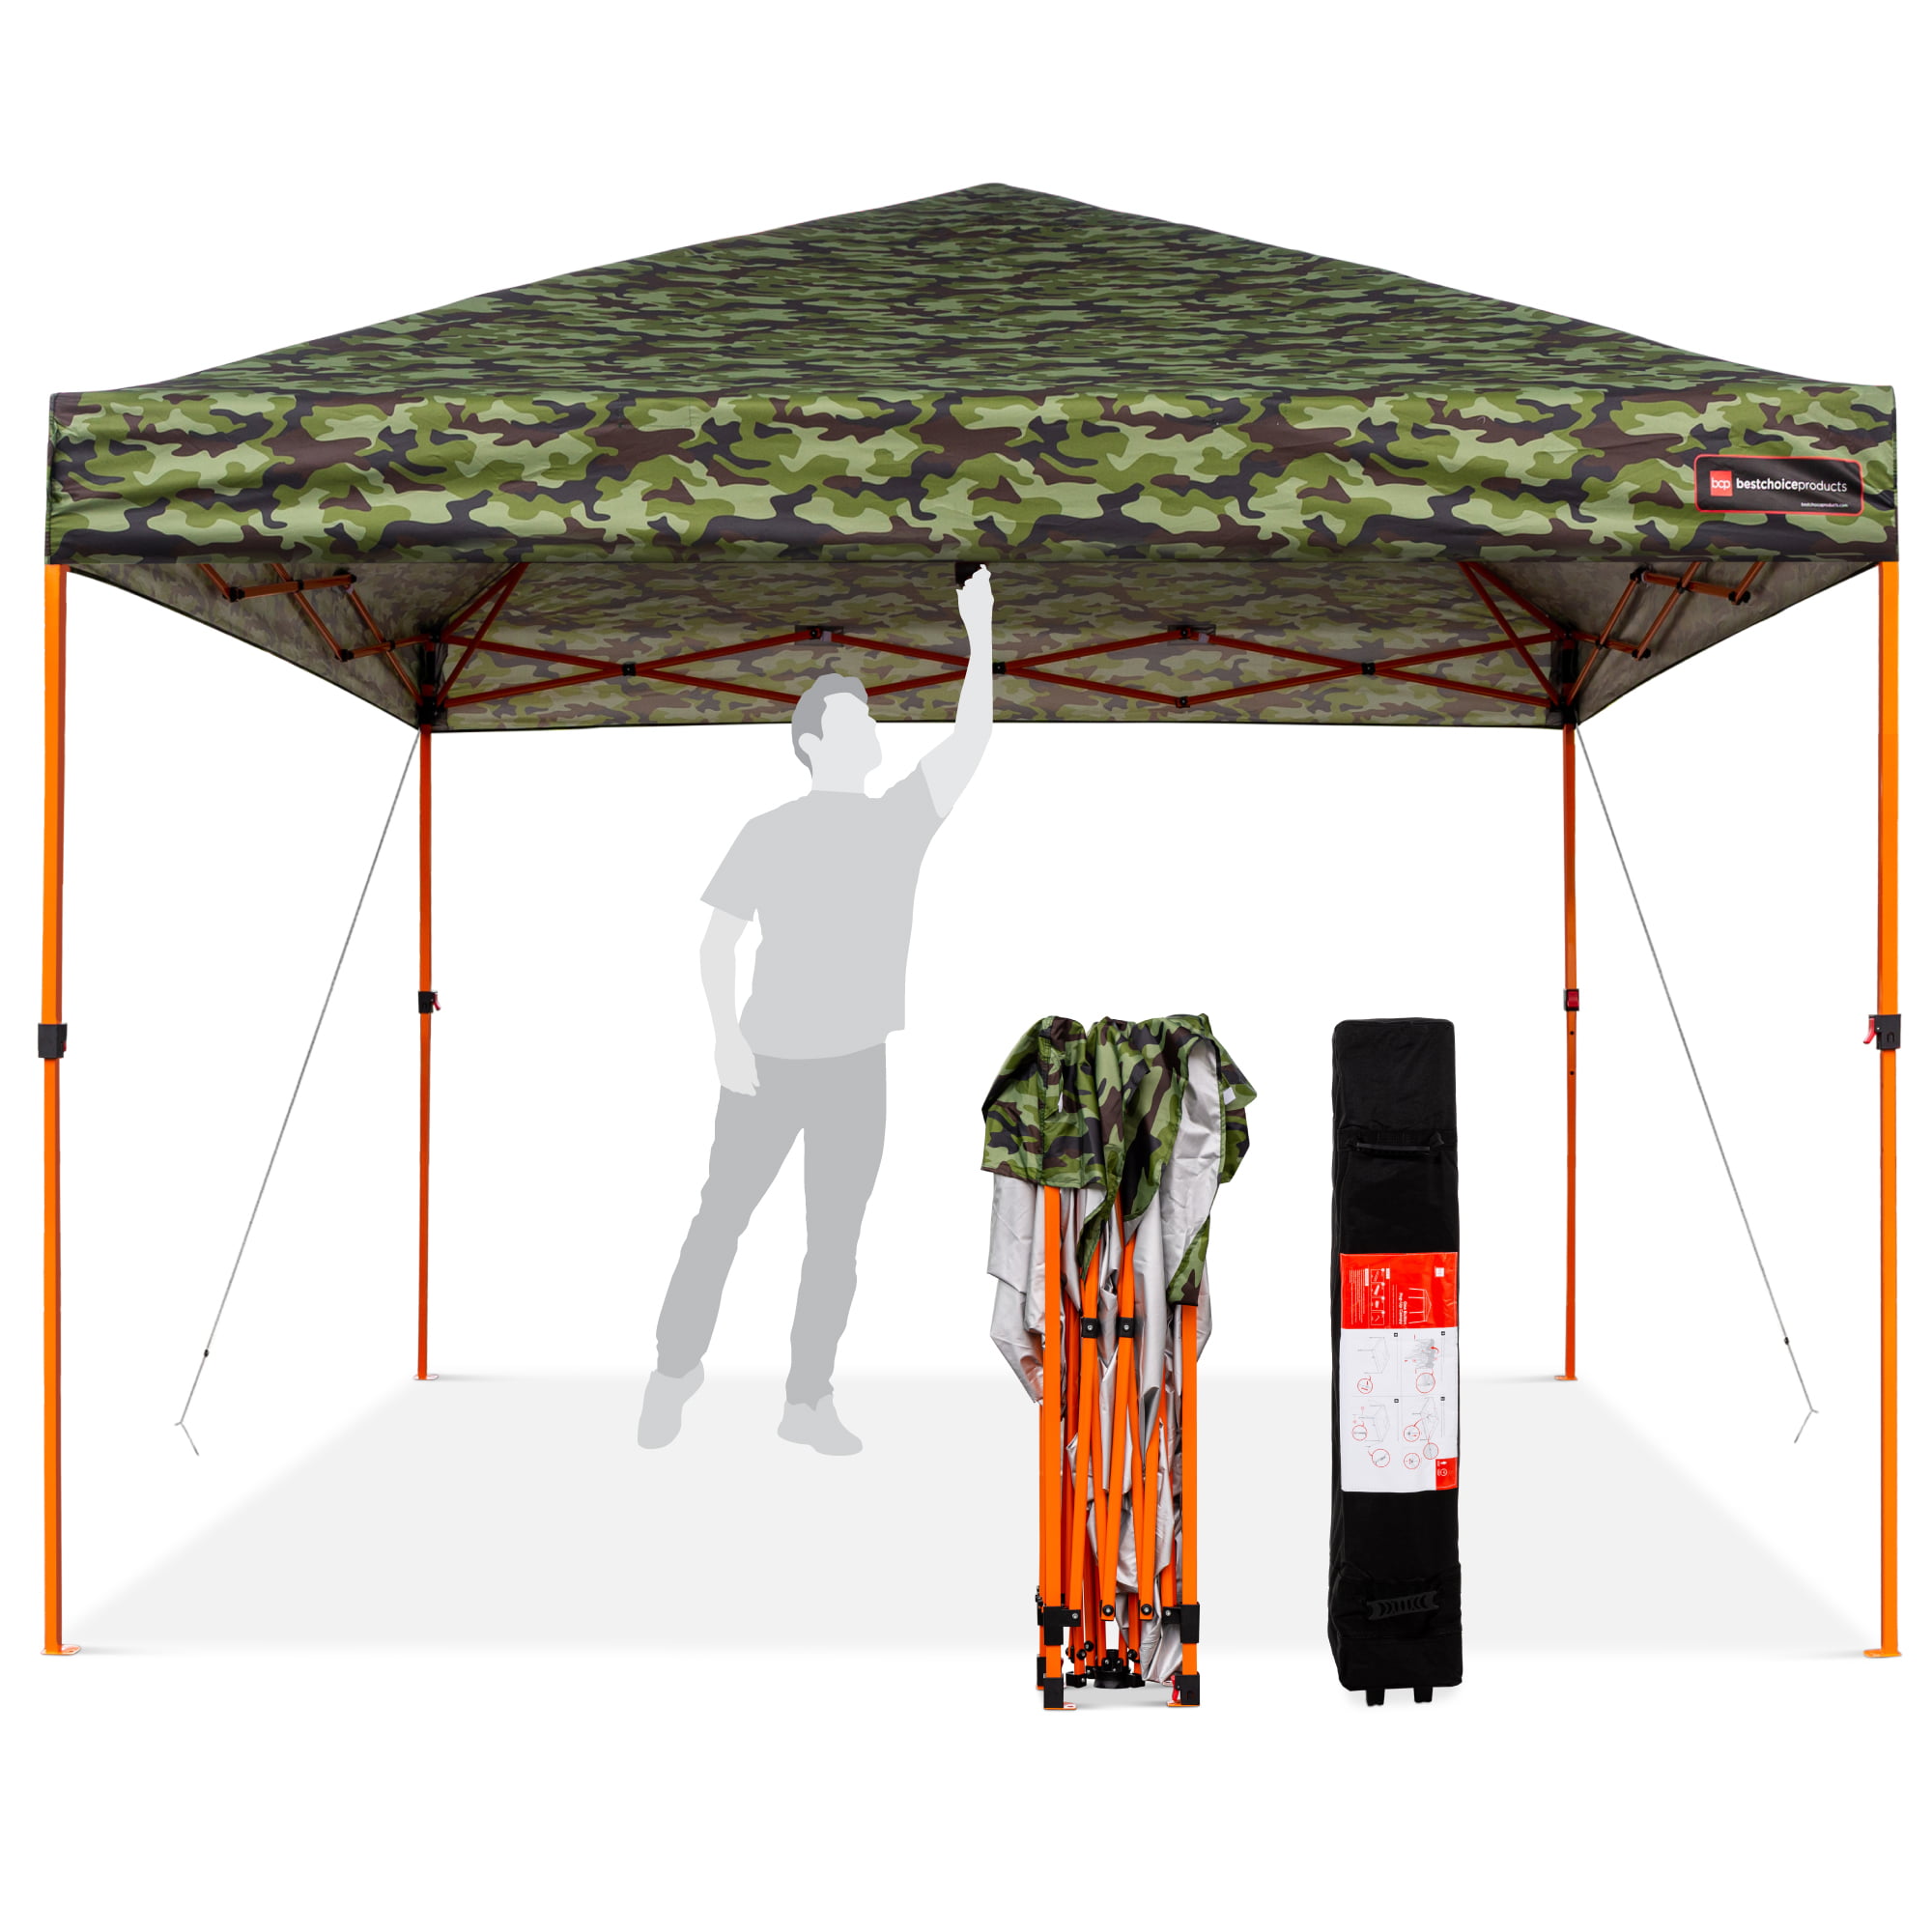 Pop-up Shelter Canopy VIE-ZYP-MG03 BLUE Details about   Viewee Canopy Tent 10' x 10' Anti-UV 